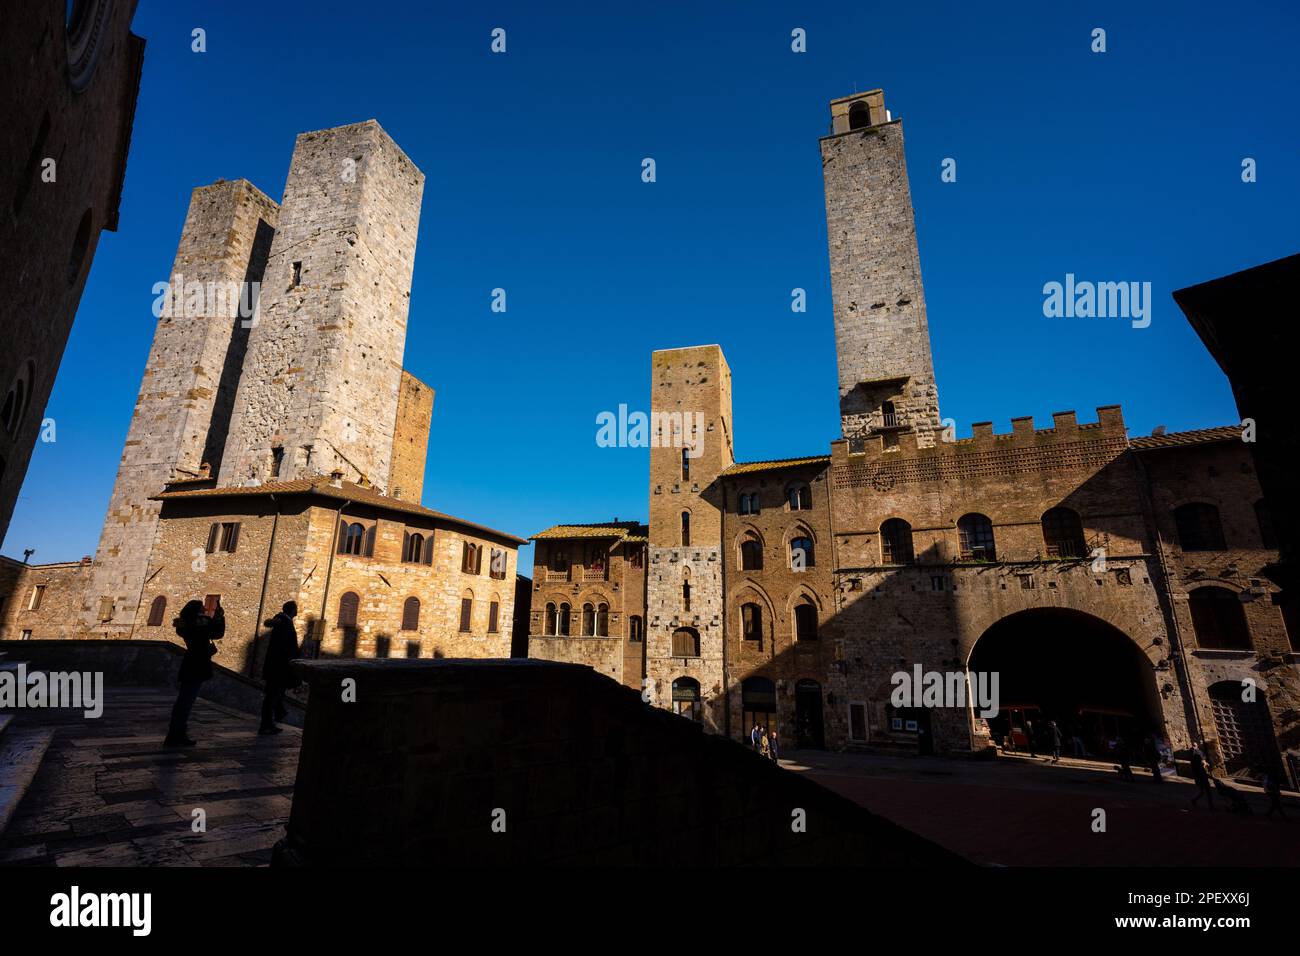 The medieval walled hill town of San Gimignano, a popularedestination for tourists in Tuscany, Italy. A UNESCO world heritage site. Stock Photo